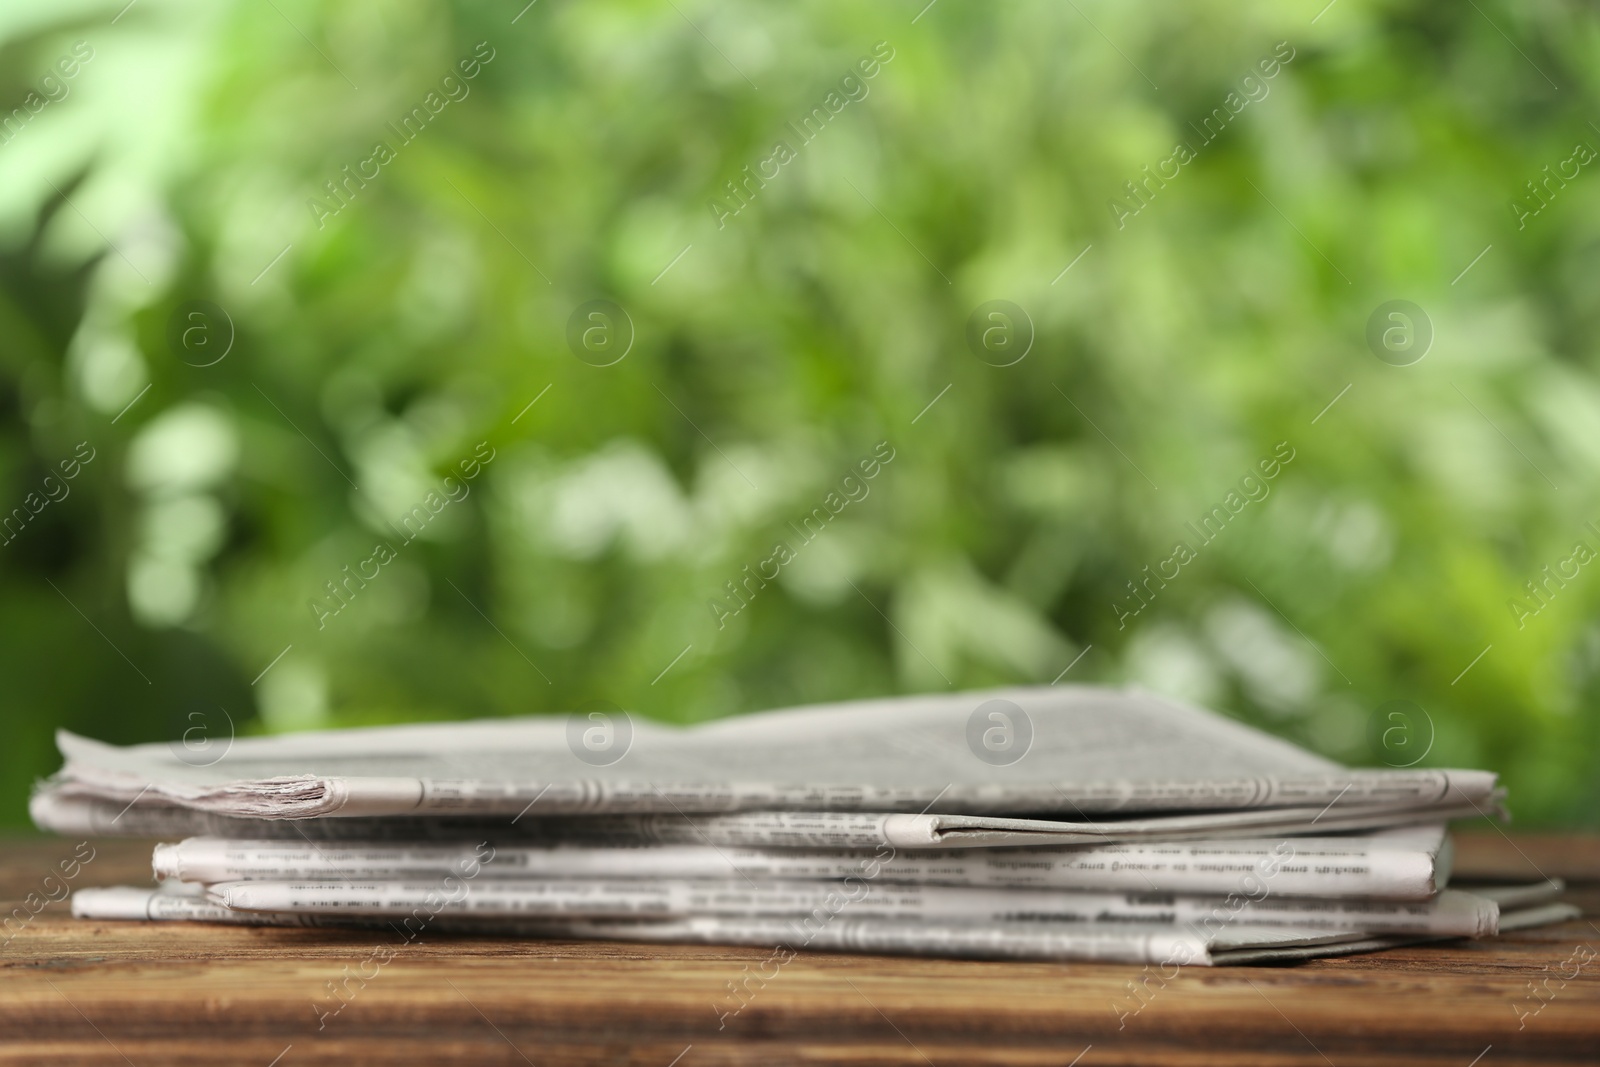 Photo of Newspapers on wooden table against blurred green background, space for text. Journalist's work